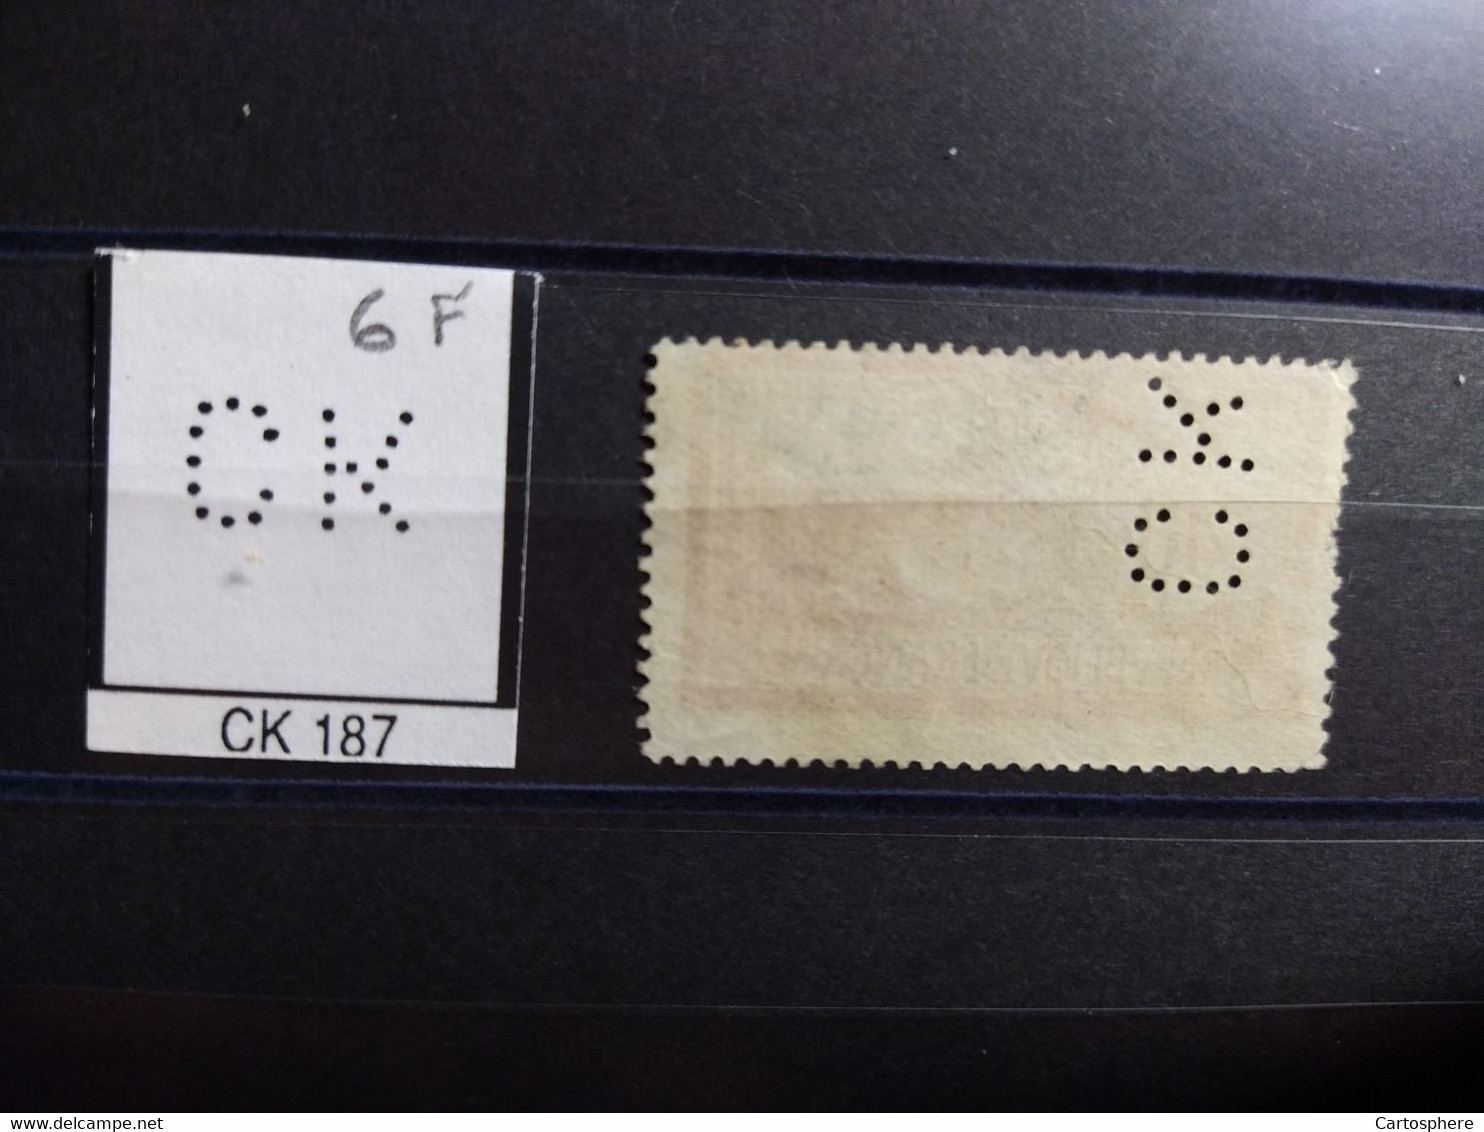 FRANCE TIMBRE CK 187 INDICE 5 SUR 119  PERFORE PERFORES PERFIN PERFINS PERFORATION PERCE  LOCHUNG - Oblitérés